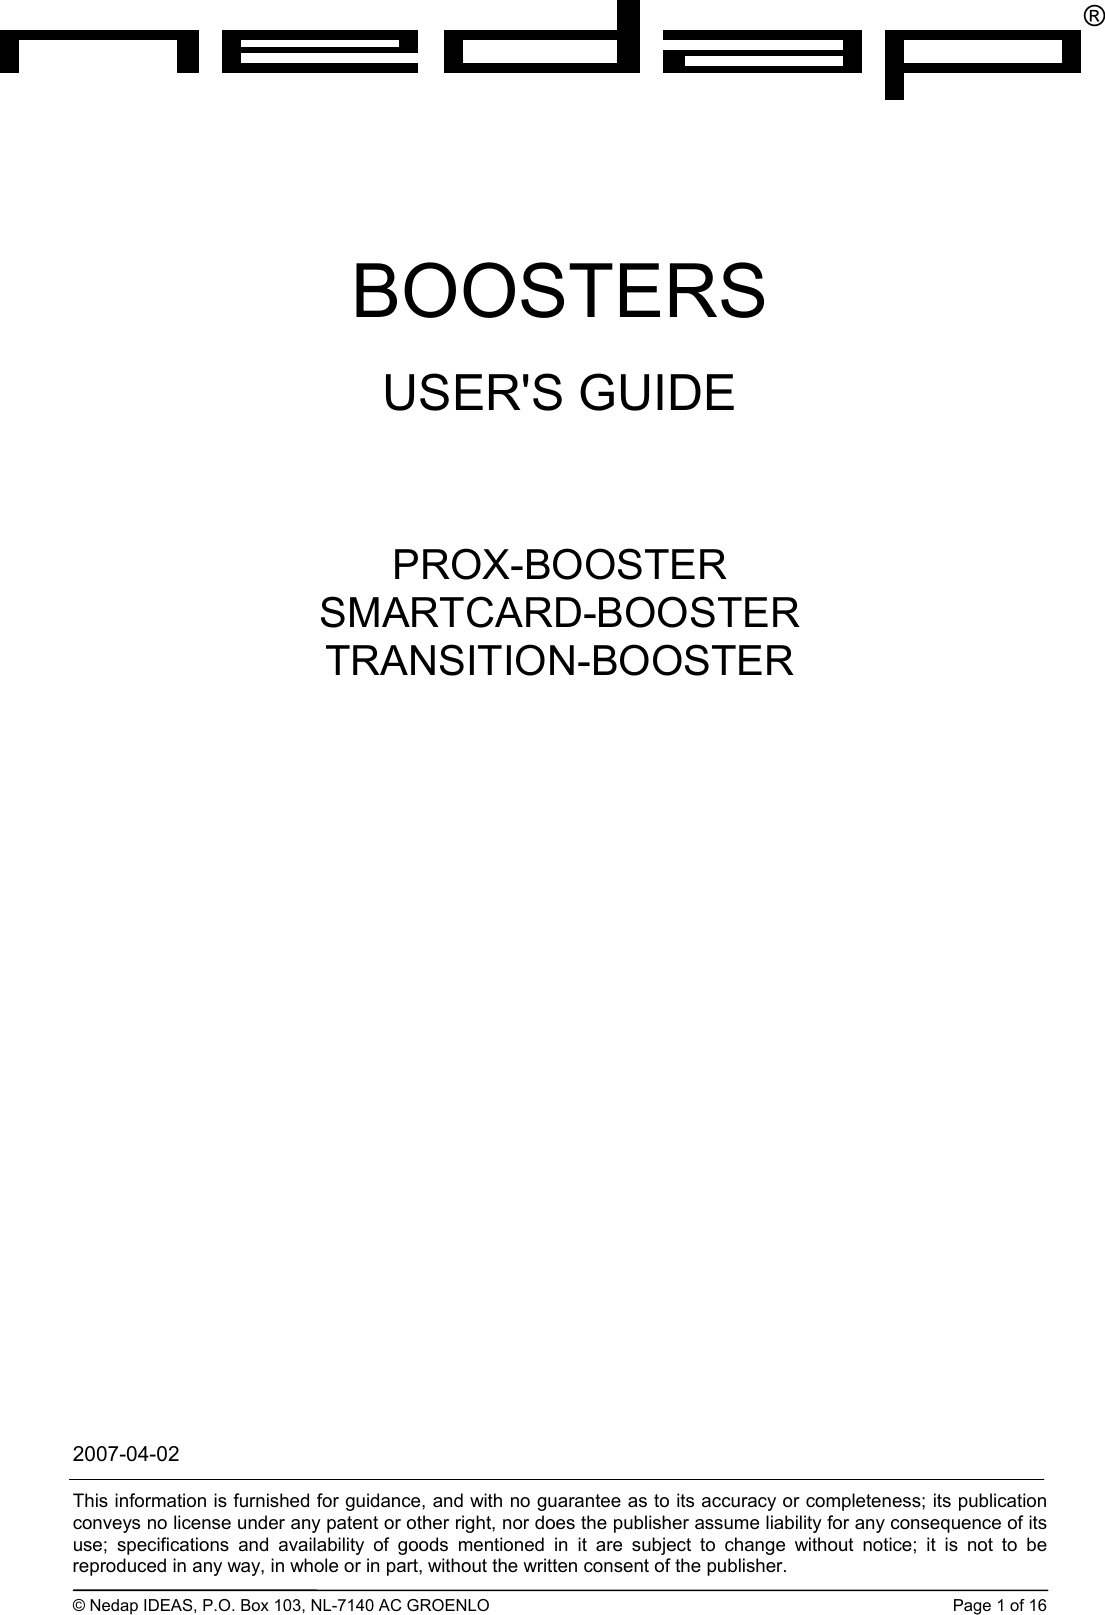 ®BOOSTERS USER&apos;S GUIDE      PROX-BOOSTER SMARTCARD-BOOSTER TRANSITION-BOOSTER 2007-04-02  This information is furnished for guidance, and with no guarantee as to its accuracy or completeness; its publication conveys no license under any patent or other right, nor does the publisher assume liability for any consequence of its use; specifications and availability of goods mentioned in it are subject to change without notice; it is not to be reproduced in any way, in whole or in part, without the written consent of the publisher.  © Nedap IDEAS, P.O. Box 103, NL-7140 AC GROENLO  Page 1 of 16 